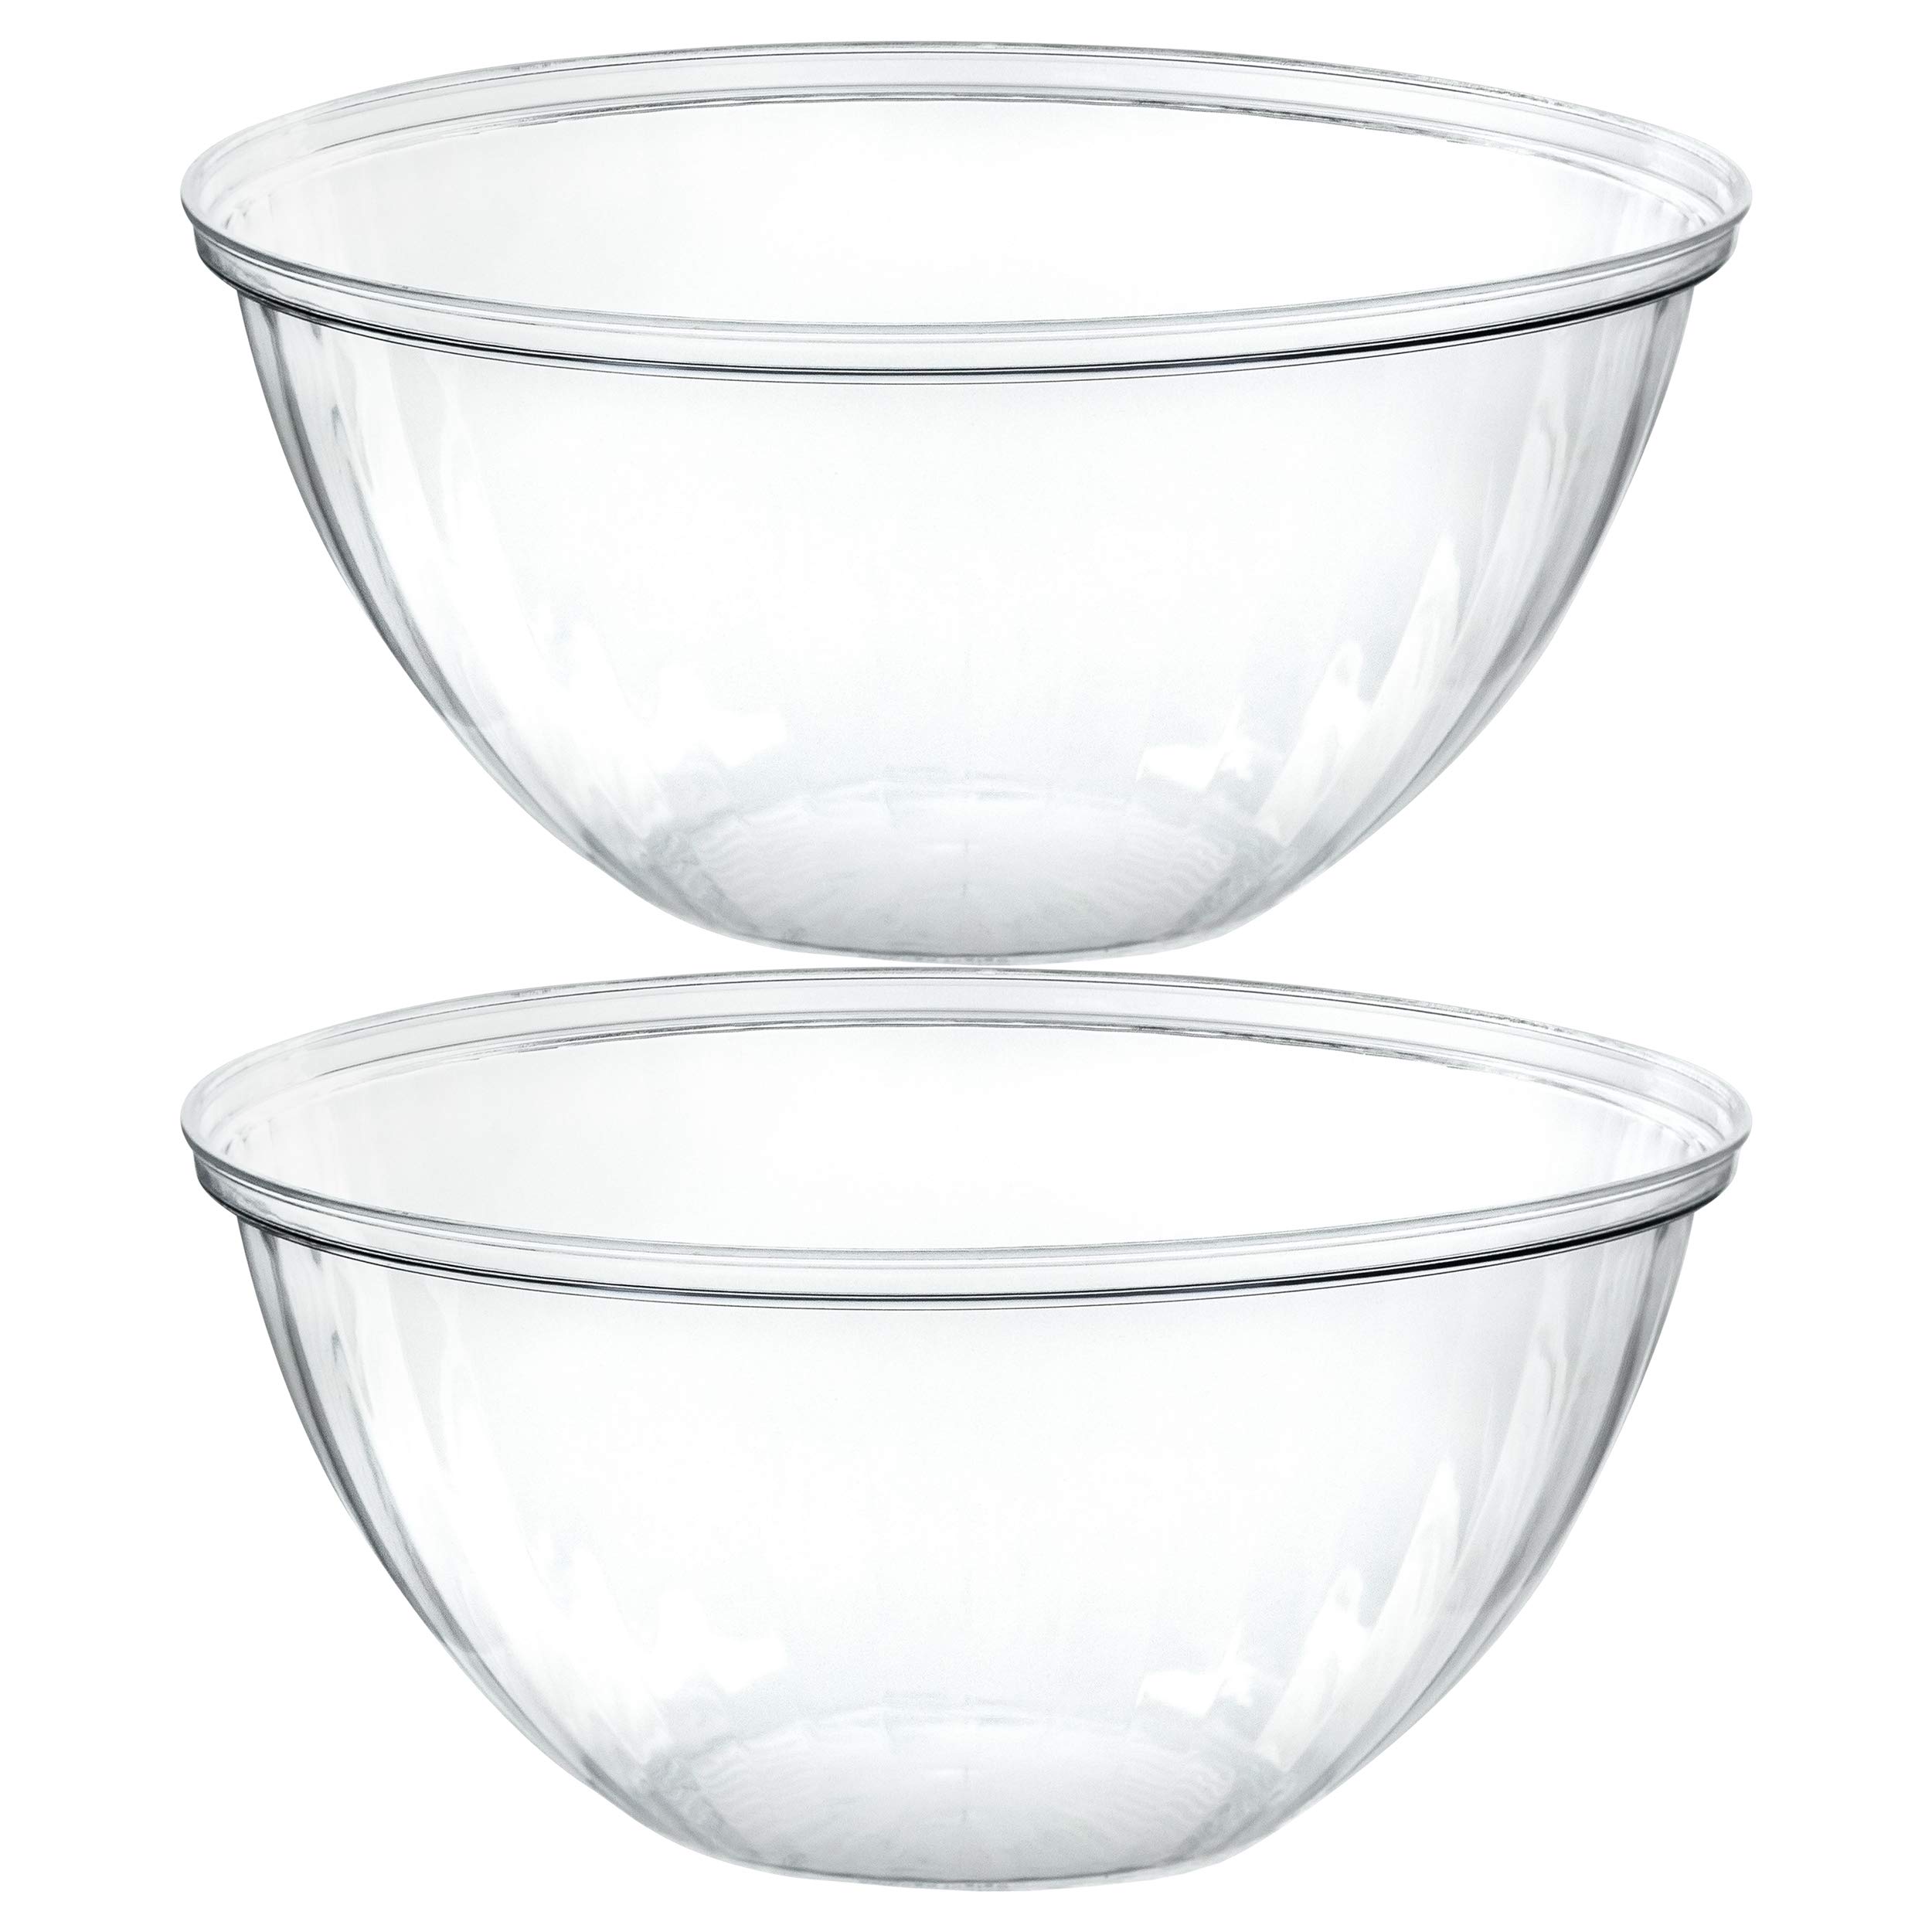 PLASTICPRO Disposable 150 Ounce Round Crystal Clear Plastic Serving Bowls  Party Snack or Salad Bowl Chip